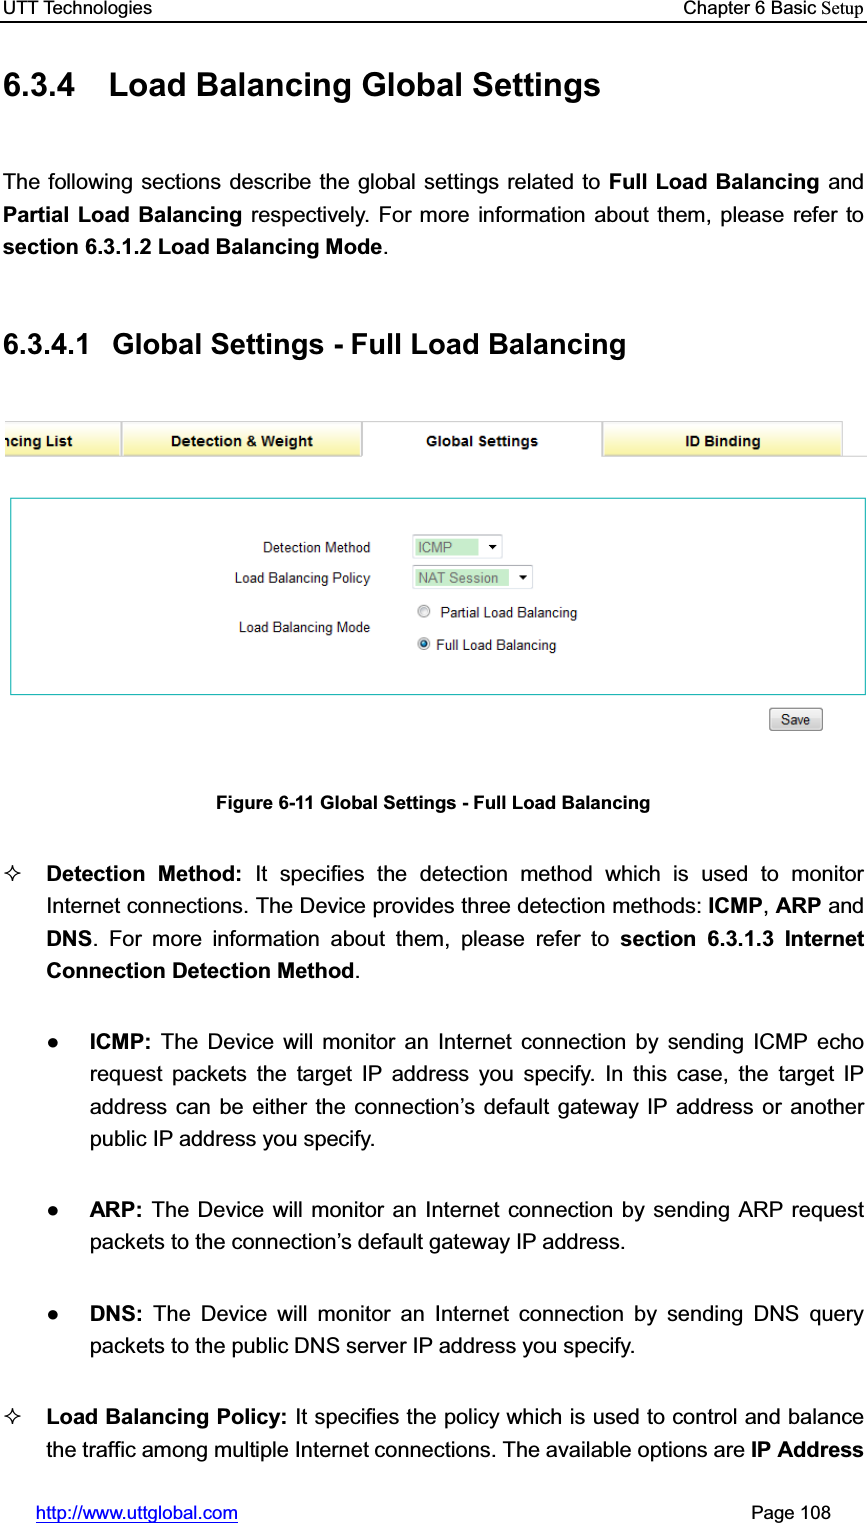 UTT Technologies    Chapter 6 Basic Setuphttp://www.uttglobal.com                                                       Page 108 6.3.4  Load Balancing Global Settings The following sections describe the global settings related to Full Load Balancing and Partial Load Balancing respectively. For more information about them, please refer to section 6.3.1.2 Load Balancing Mode.6.3.4.1  Global Settings - Full Load Balancing Figure 6-11 Global Settings - Full Load Balancing Detection Method: It specifies the detection method which is used to monitor Internet connections. The Device provides three detection methods: ICMP,ARP and DNS. For more information about them, please refer to section 6.3.1.3 Internet Connection Detection Method.ƔICMP:  The Device will monitor an Internet connection by sending ICMP echo request packets the target IP address you specify. In this case, the target IP address can be either the connection¶s default gateway IP address or another public IP address you specify.ƔARP:  The Device will monitor an Internet connection by sending ARP request packets to the connection¶s default gateway IP address.ƔDNS:  The Device will monitor an Internet connection by sending DNS query packets to the public DNS server IP address you specify.Load Balancing Policy: It specifies the policy which is used to control and balance the traffic among multiple Internet connections. The available options are IP Address